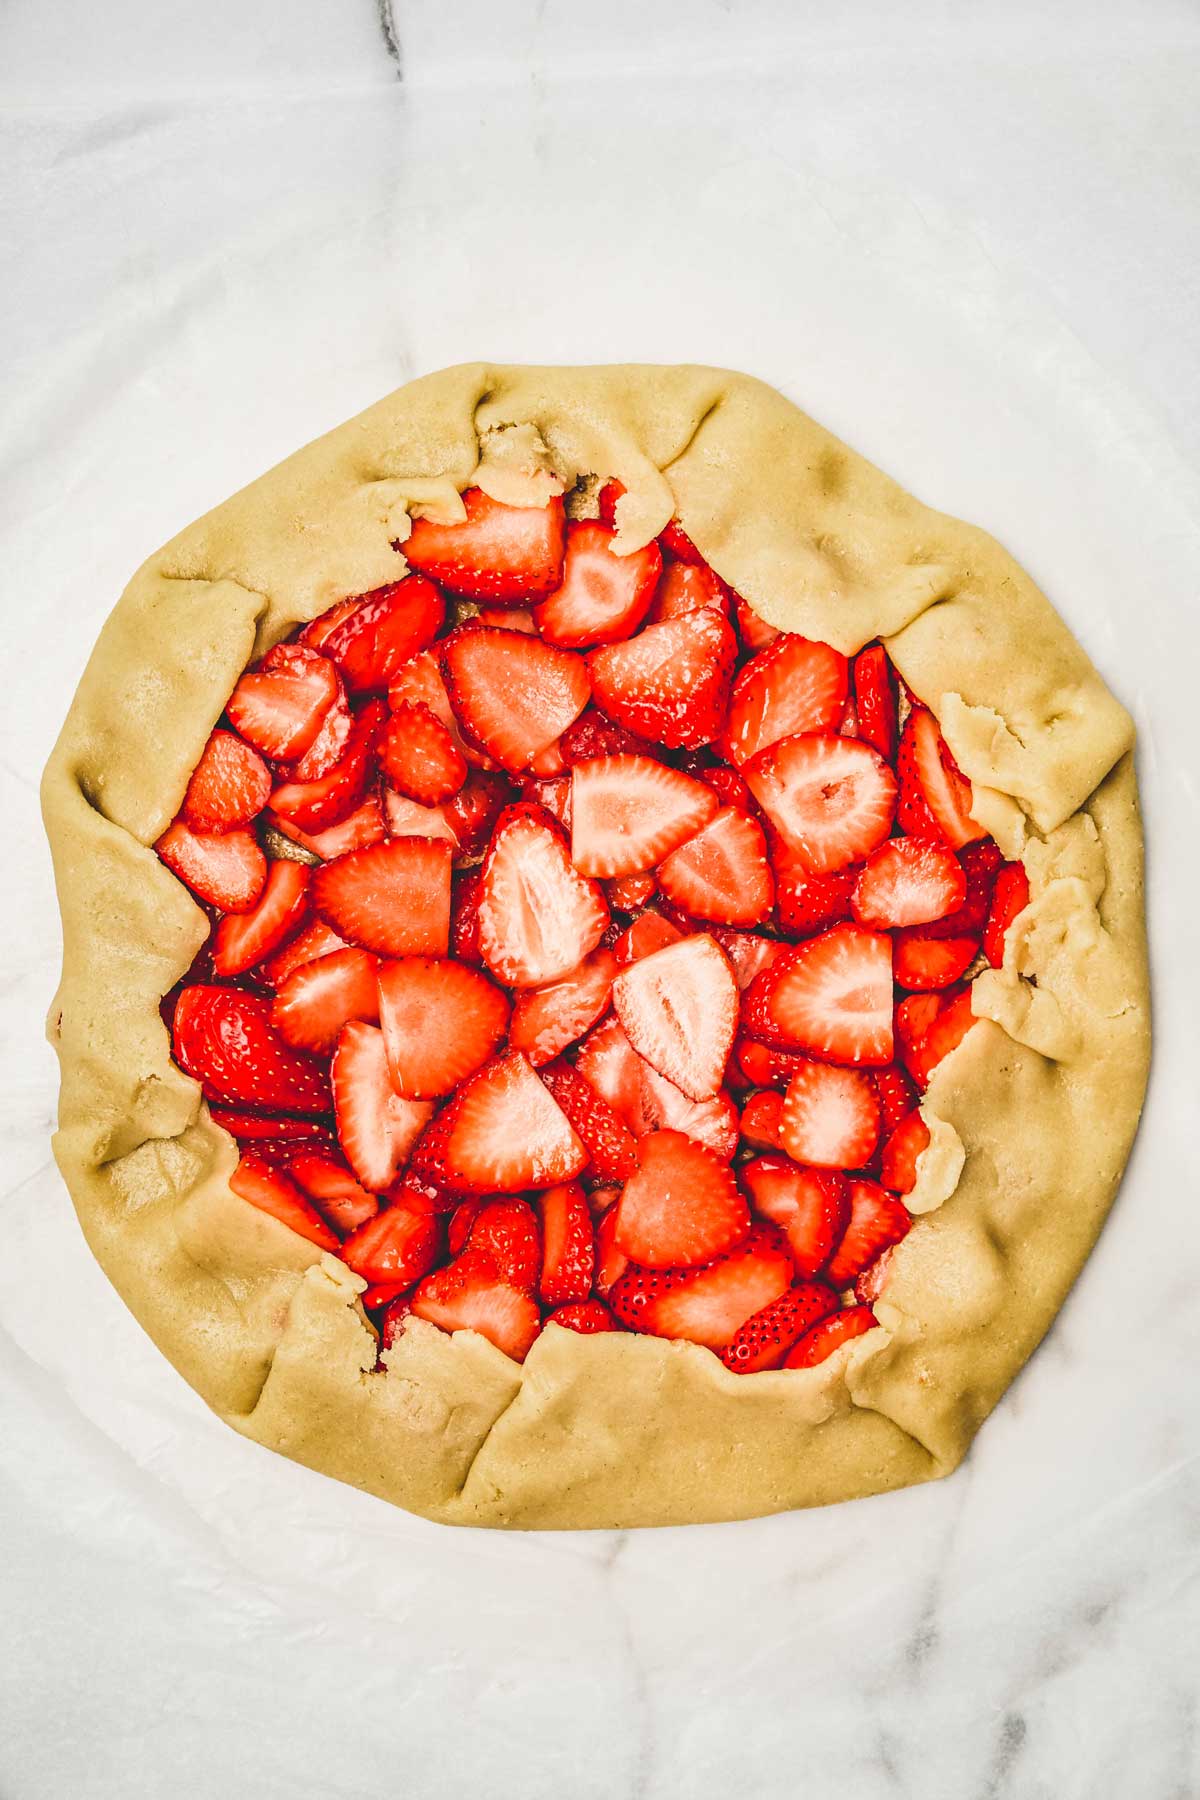 Set up of strawberry galette before baking